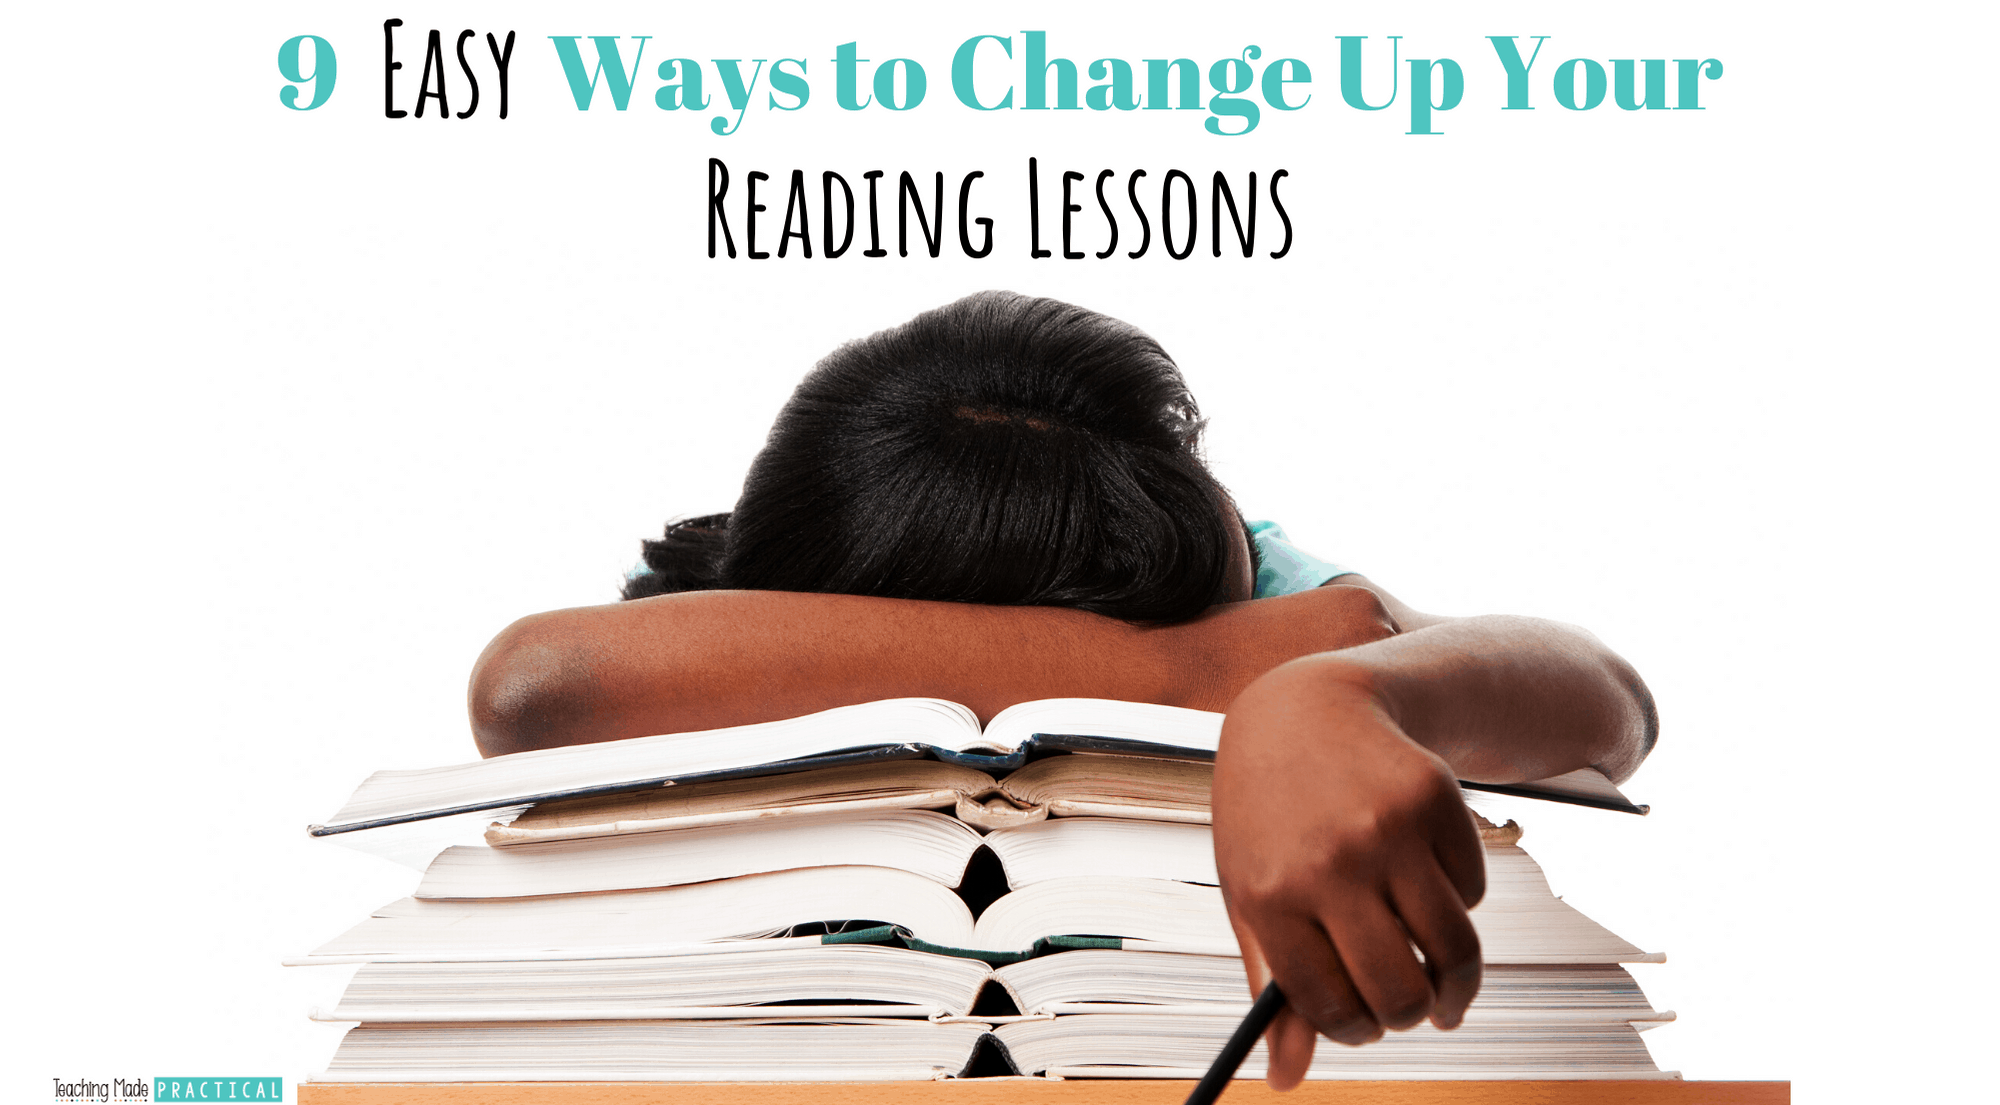 Ideas to change up your upper elementary reading lessons (third, fourth, and fifth grade) - alternatives to round robin reading